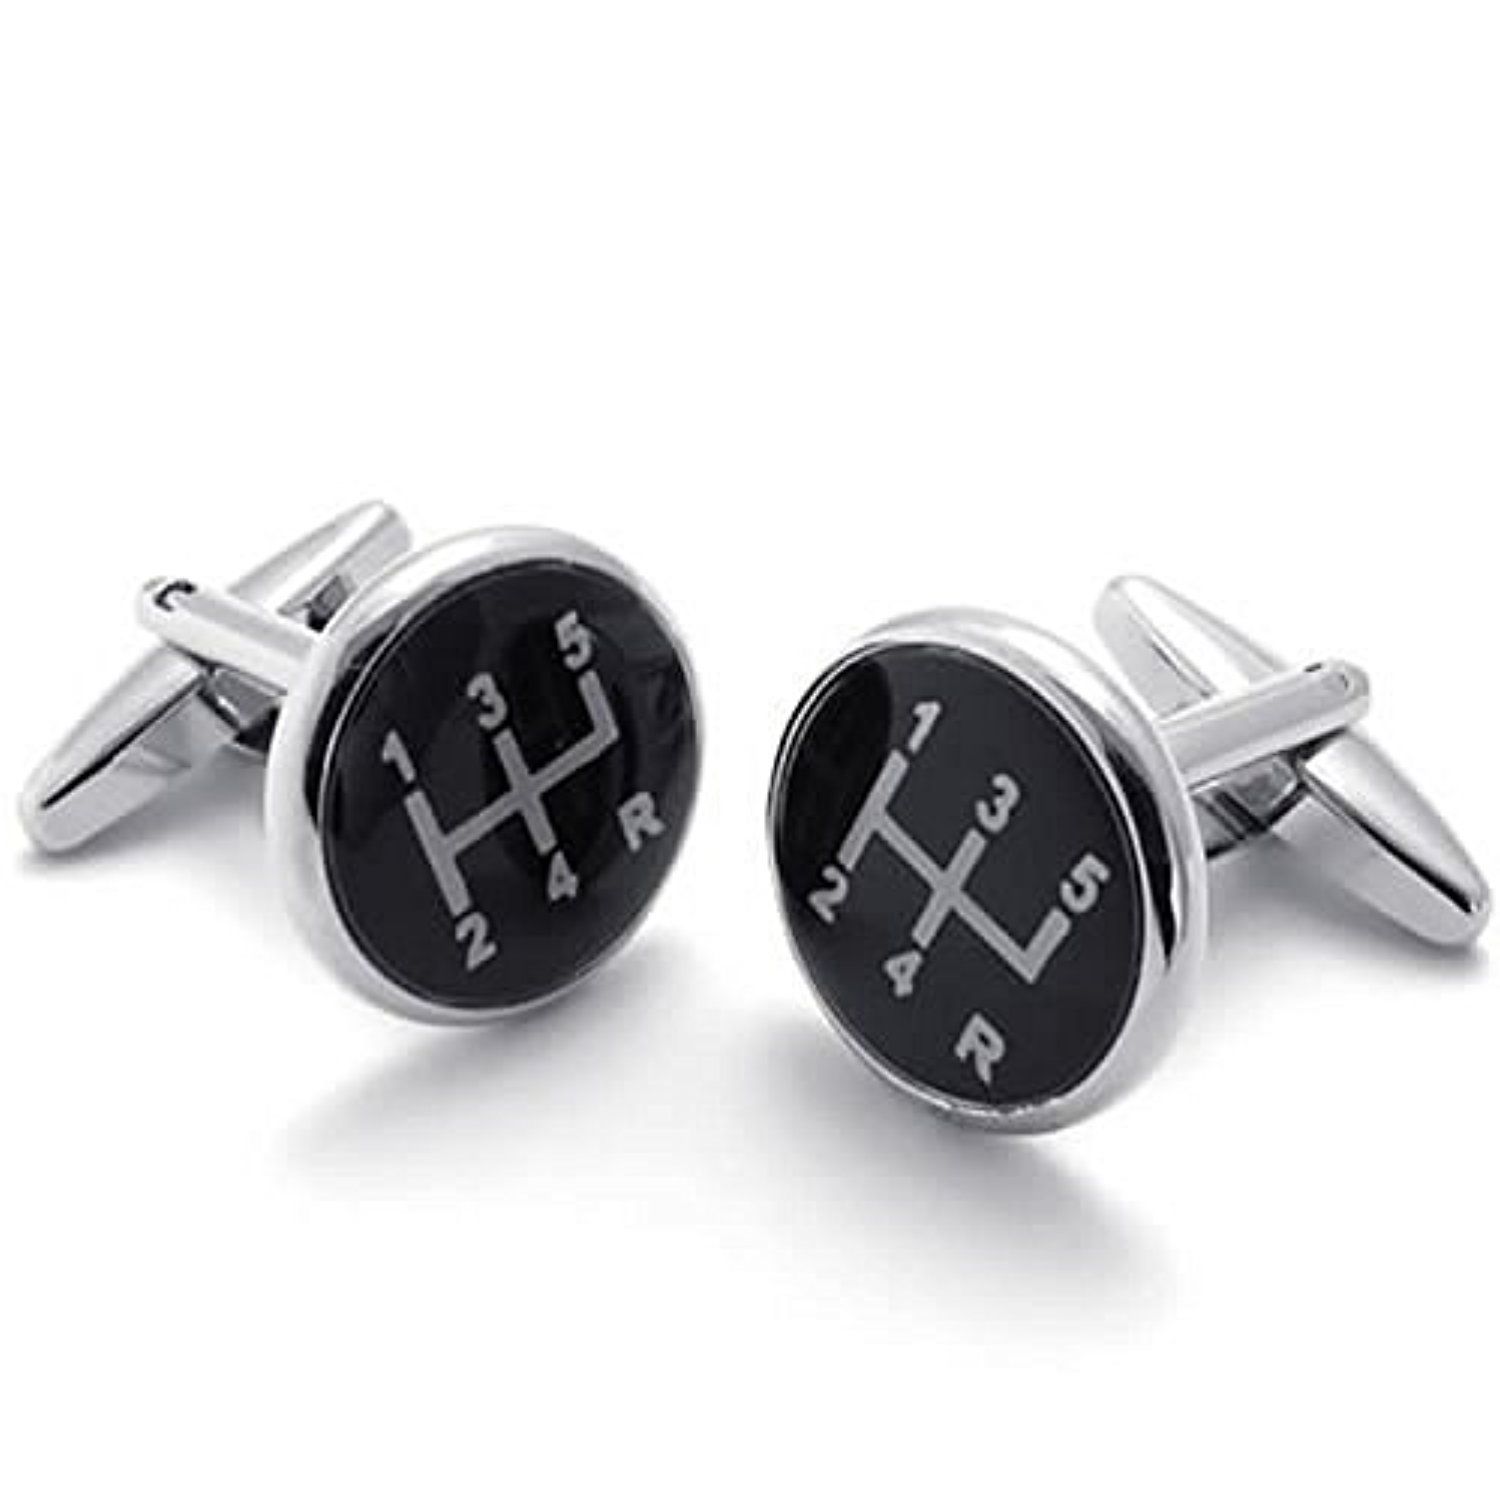 Express your style with elegance: Exquisite mens cufflinks for a unique look